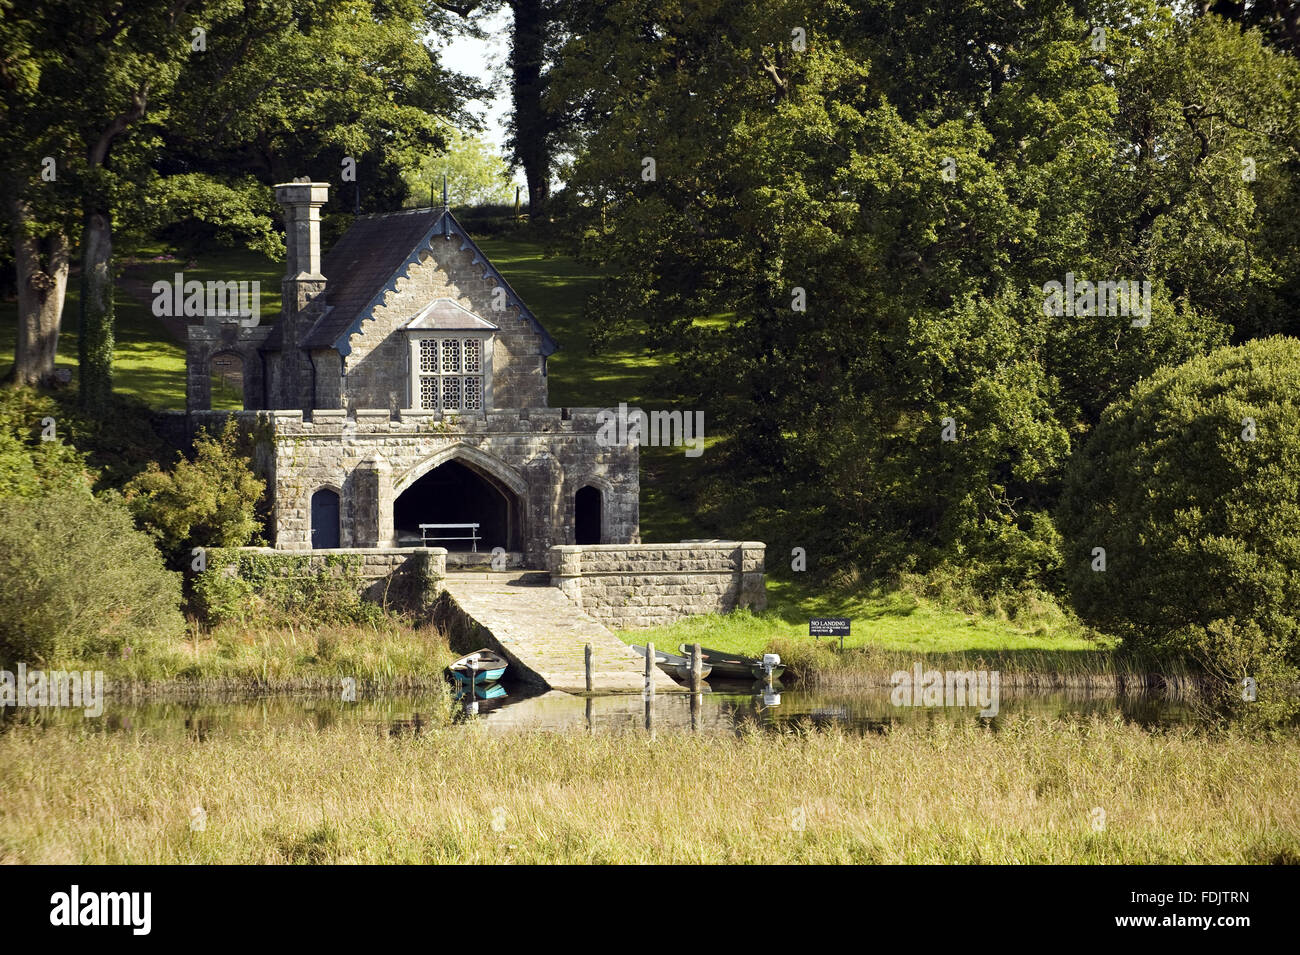 The Victorian boathouse on Lough Erne at Crom, Co. Fermanagh, Northern Ireland. Stock Photo